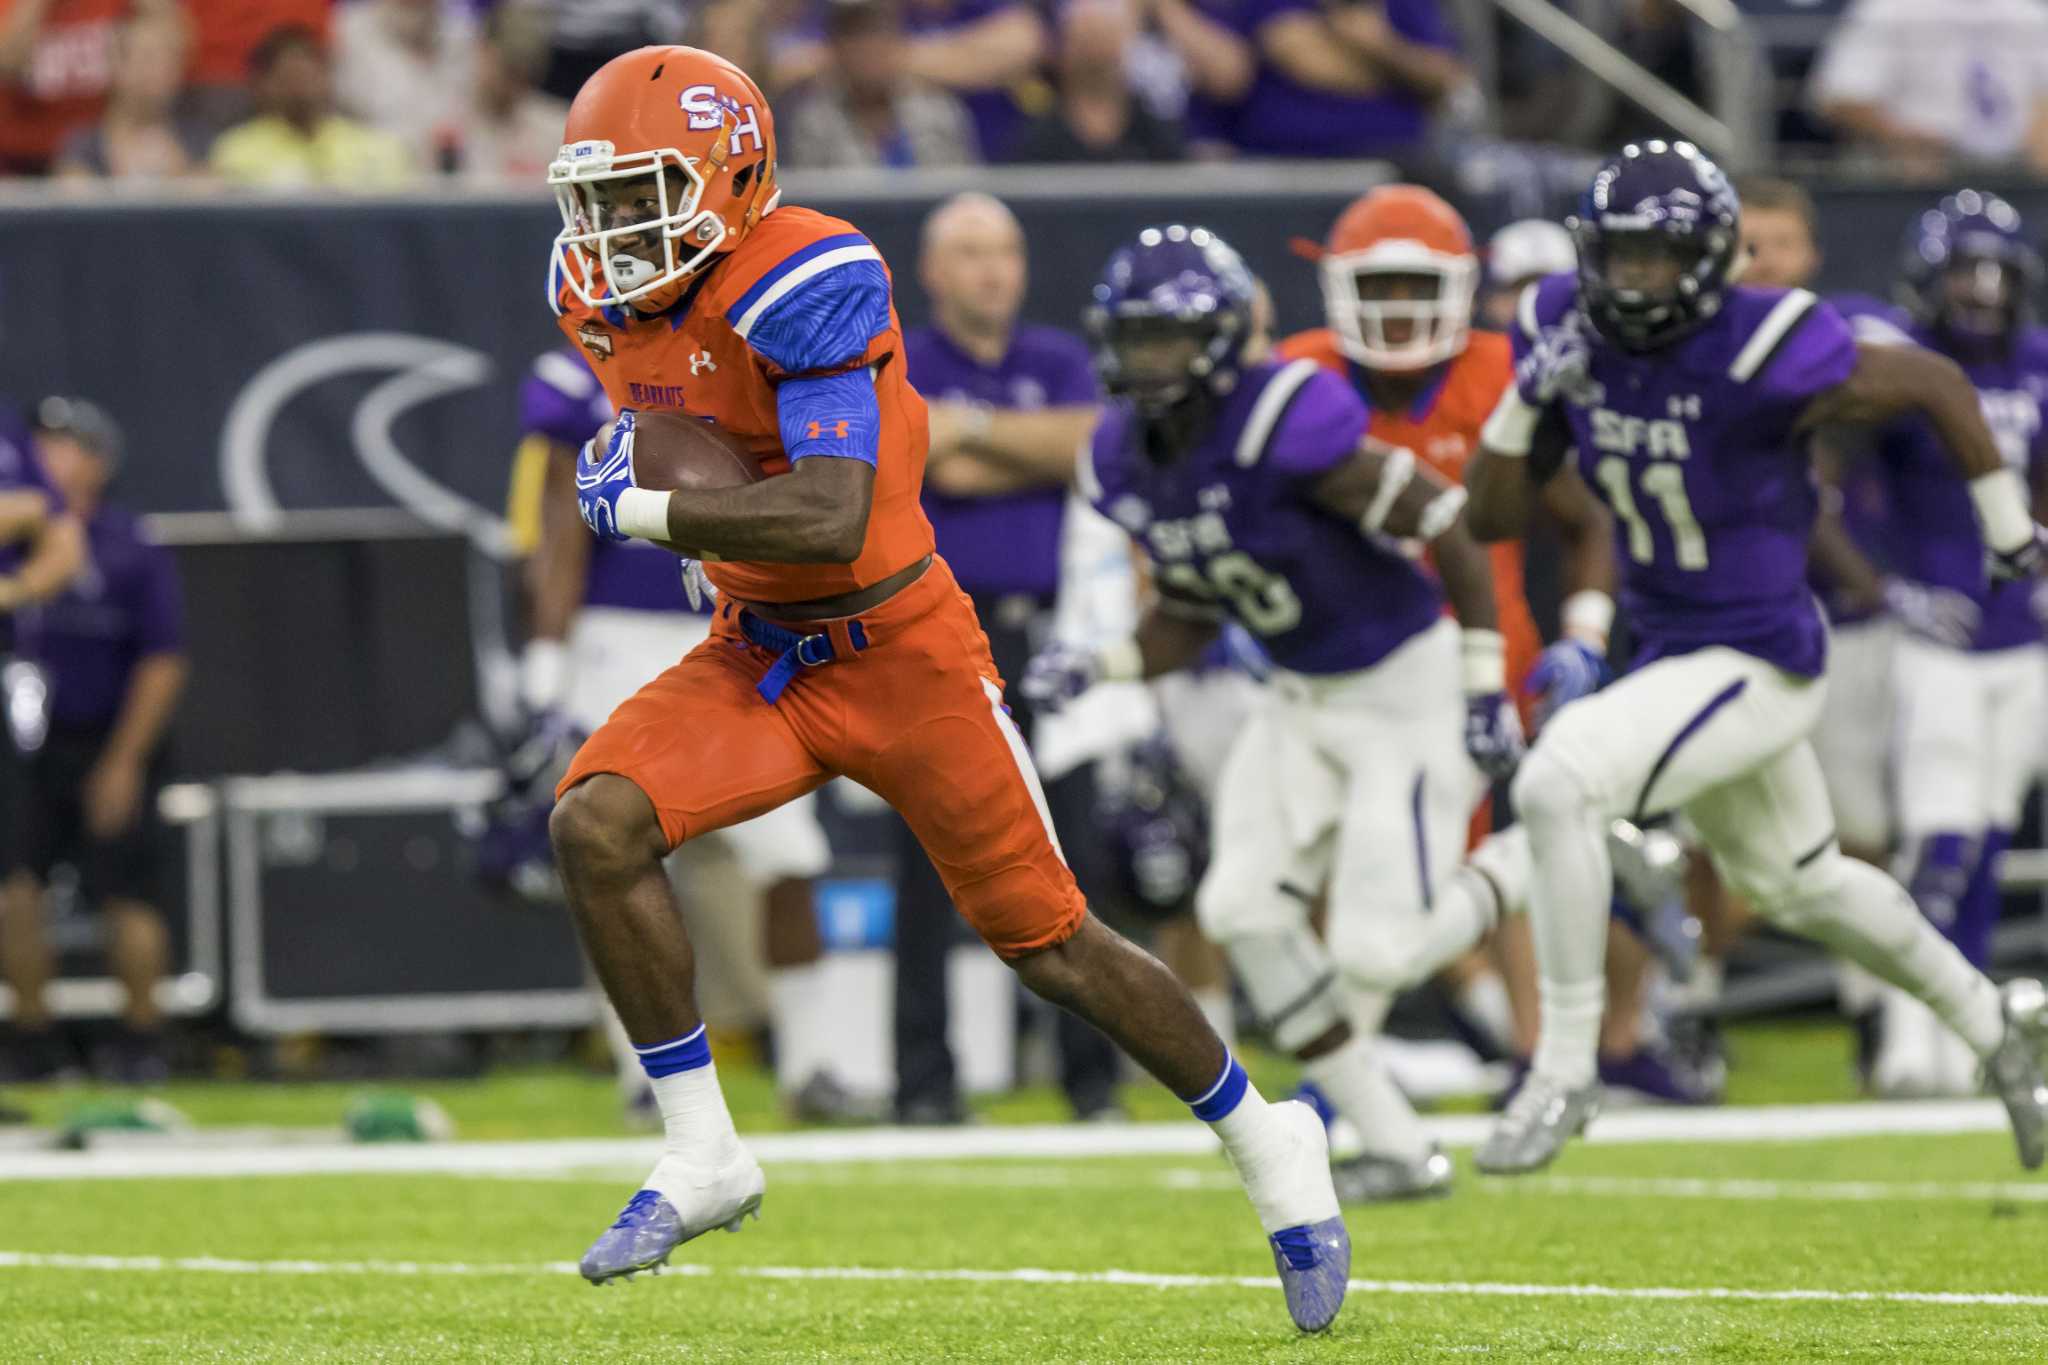 College football preview: Sam Houston State at New Mexico